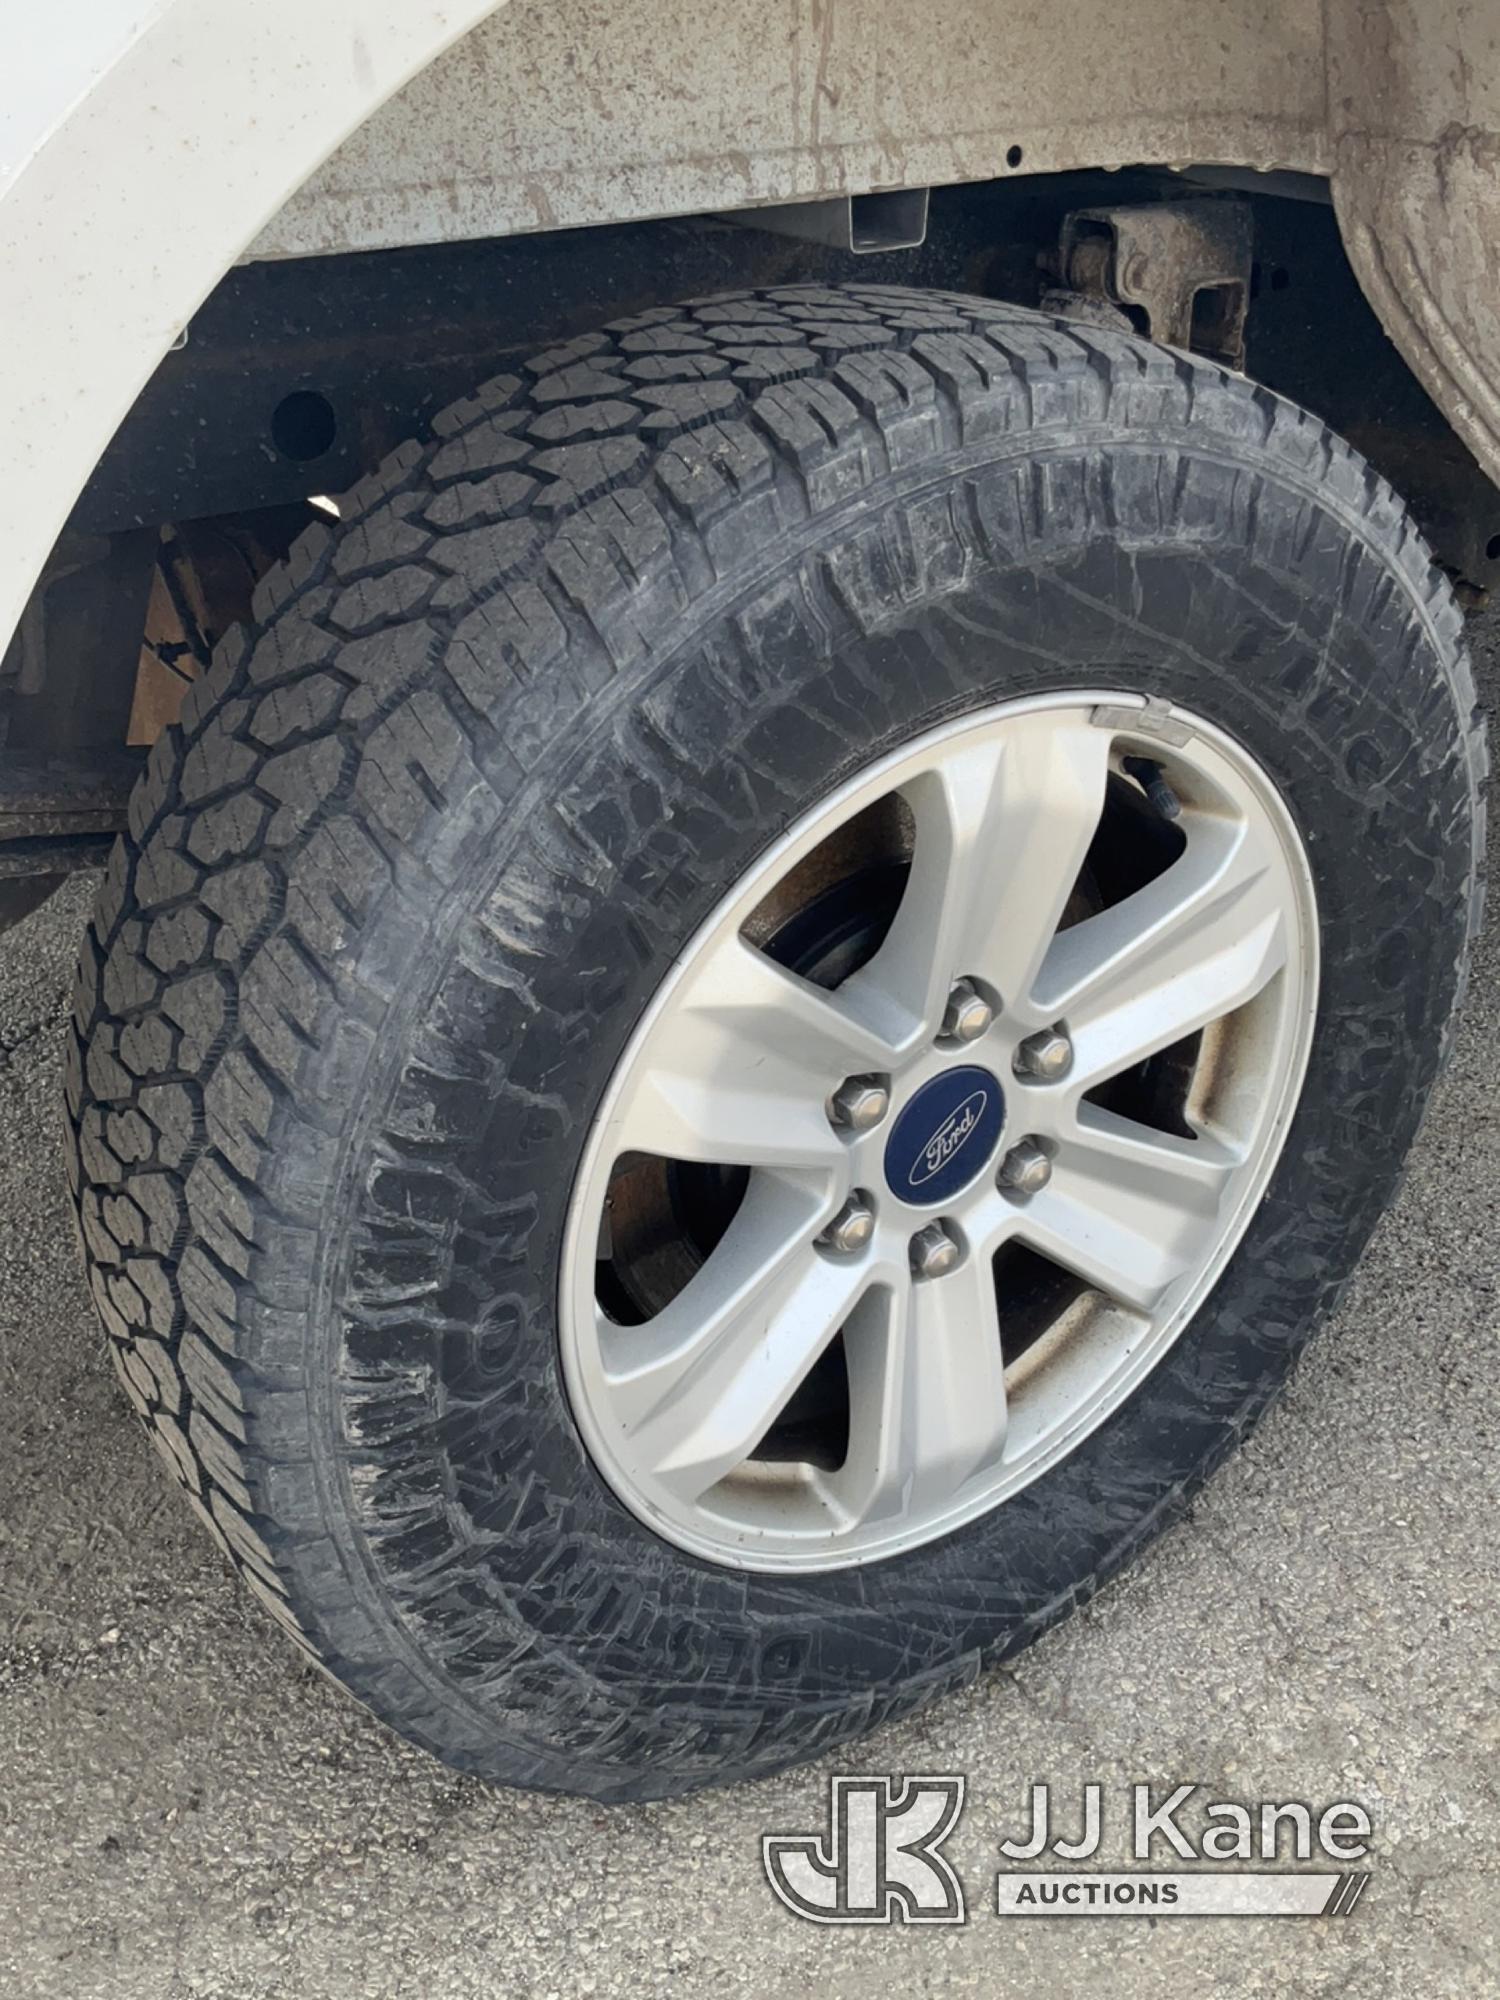 (South Beloit, IL) 2015 Ford F150 Extended-Cab Pickup Truck Runs, Moves, Front Bumper Damage